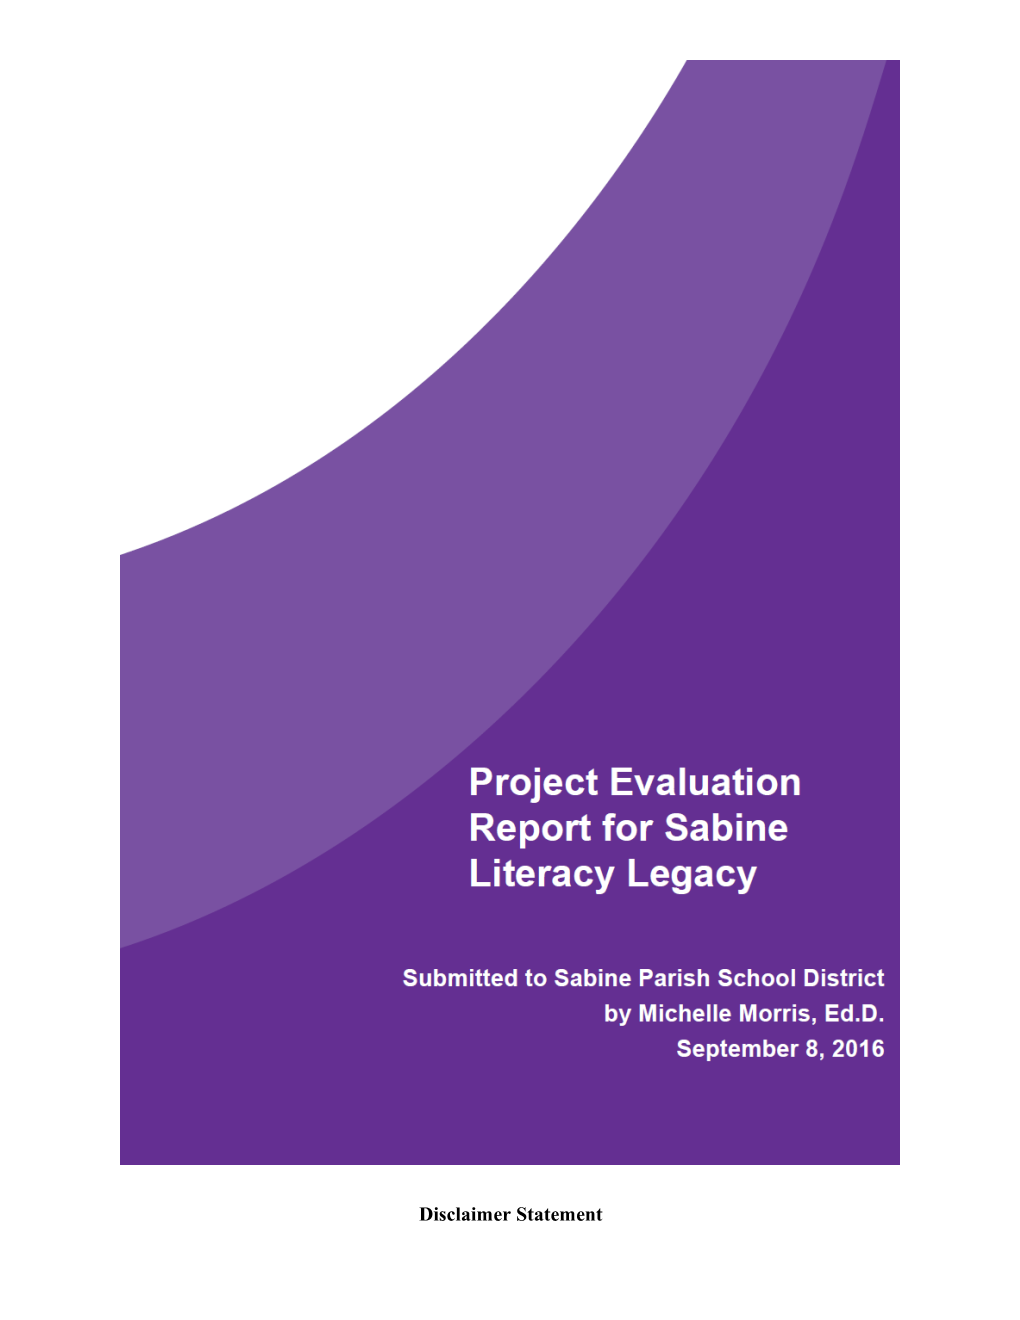 Evaluation Report for Sabine Literacy Legacy (MS Word)